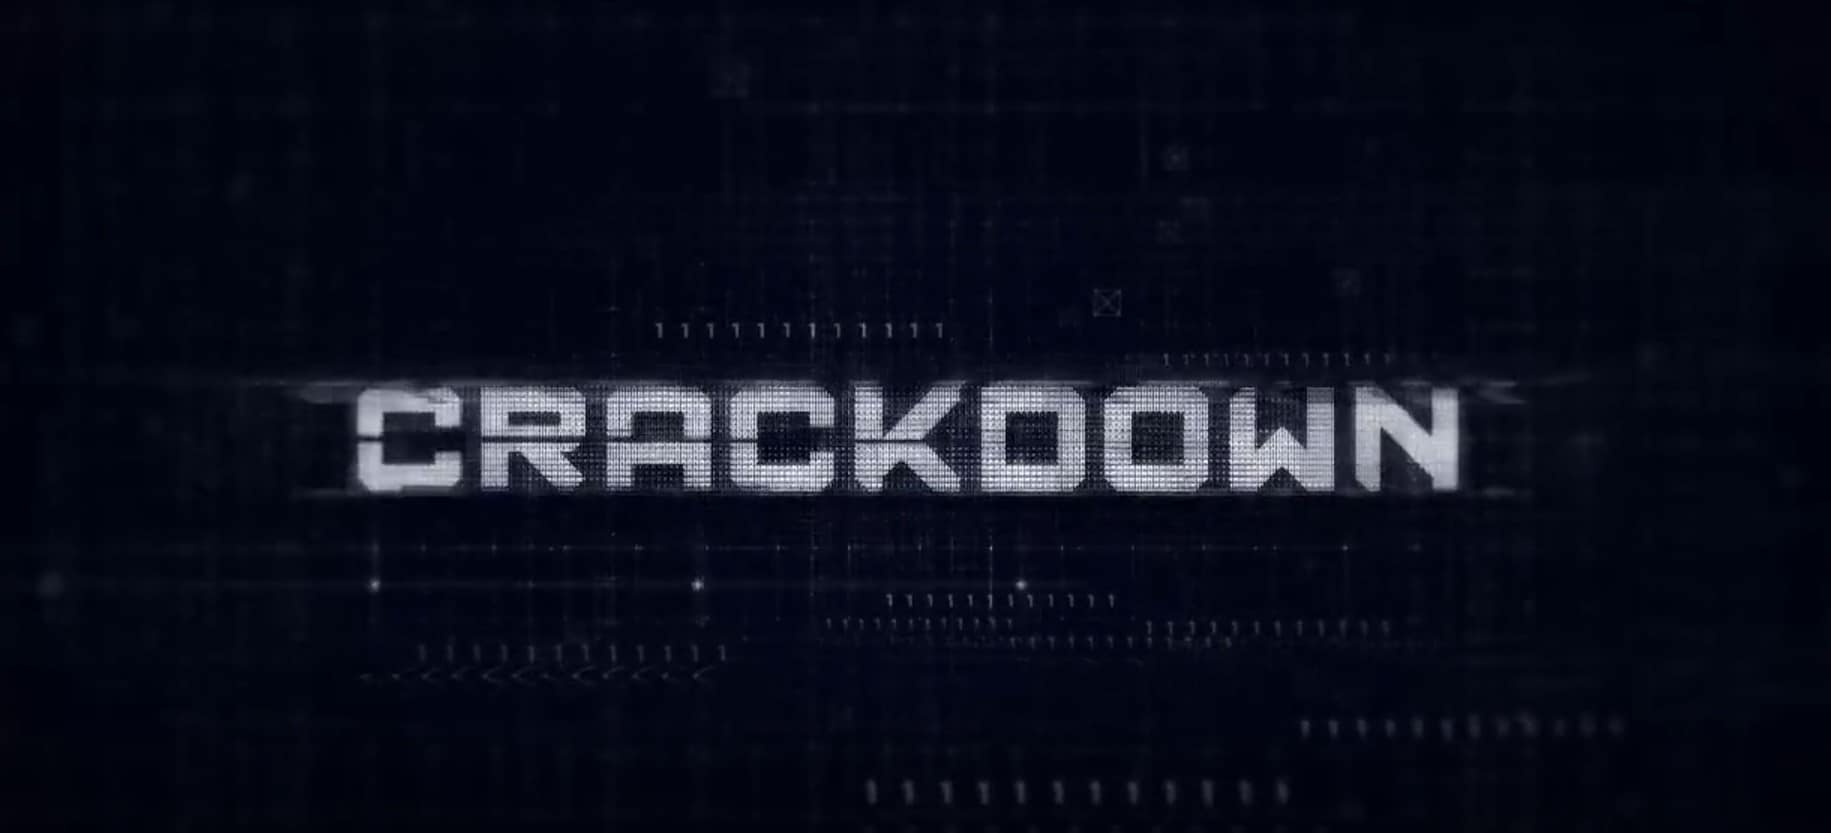 how to watch crackdown season 2